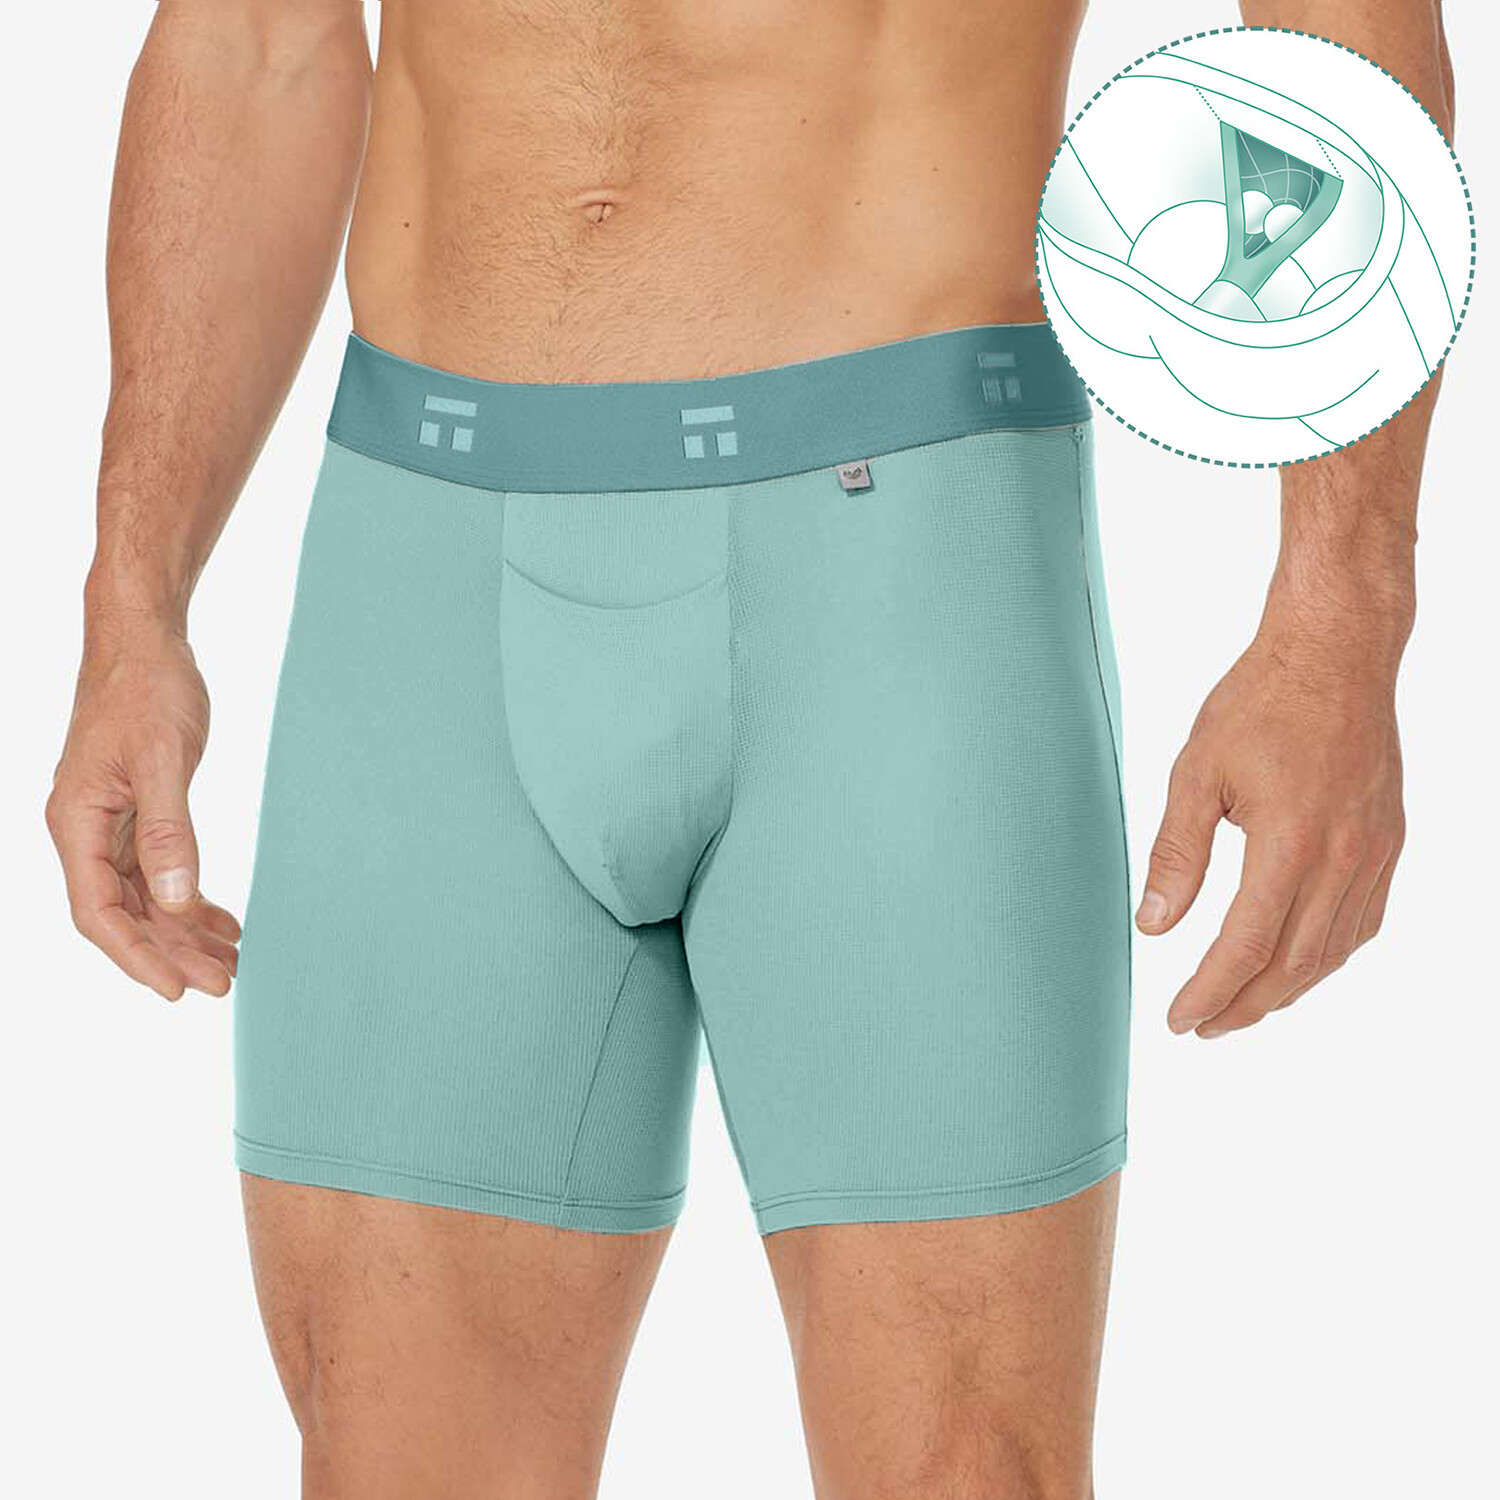 Air 4 Hammock Pouch Boxer Brief // Arctic (M) - Tommy John